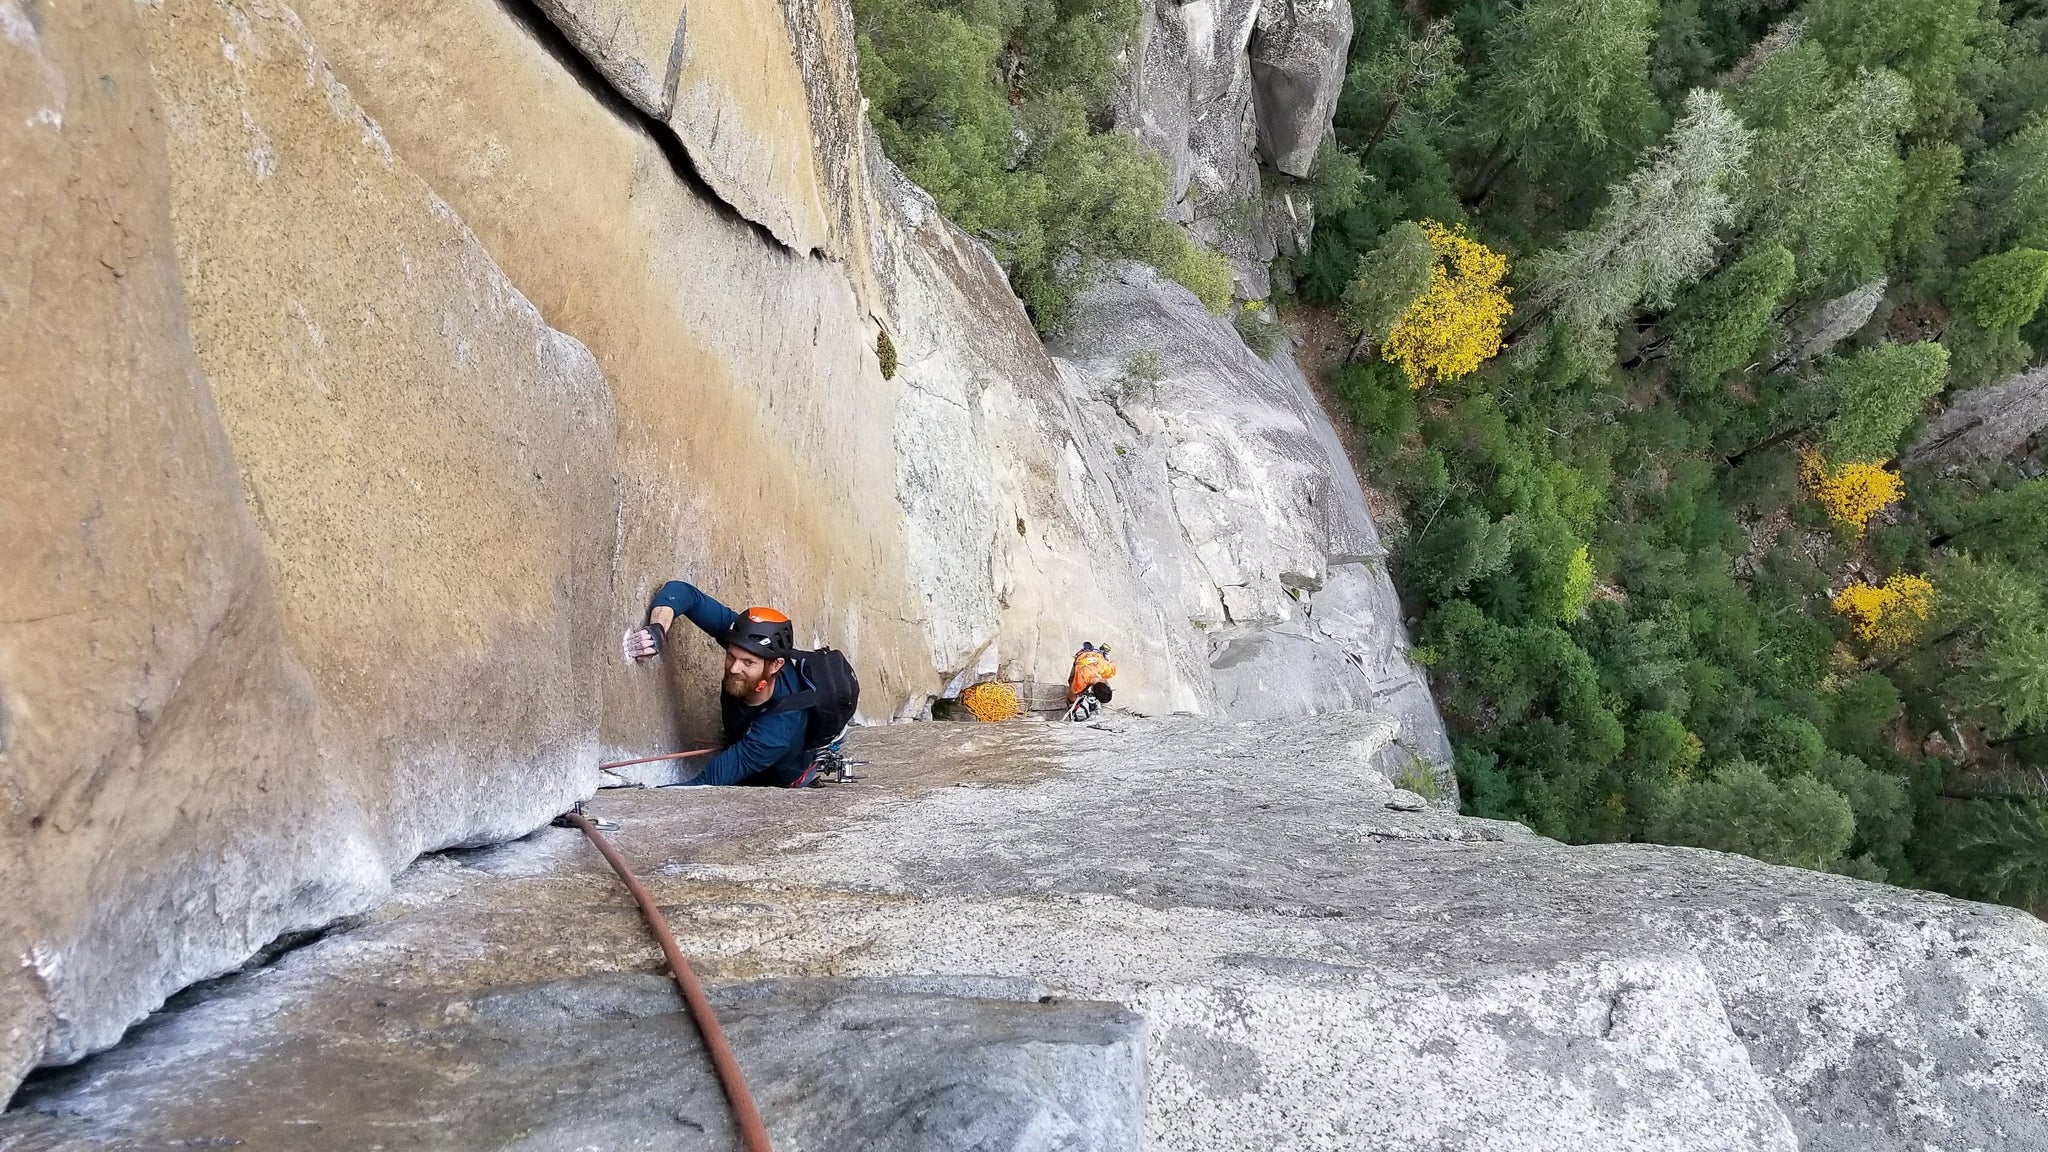 Climbing high on the exquisite granite of Yosemite National Park.